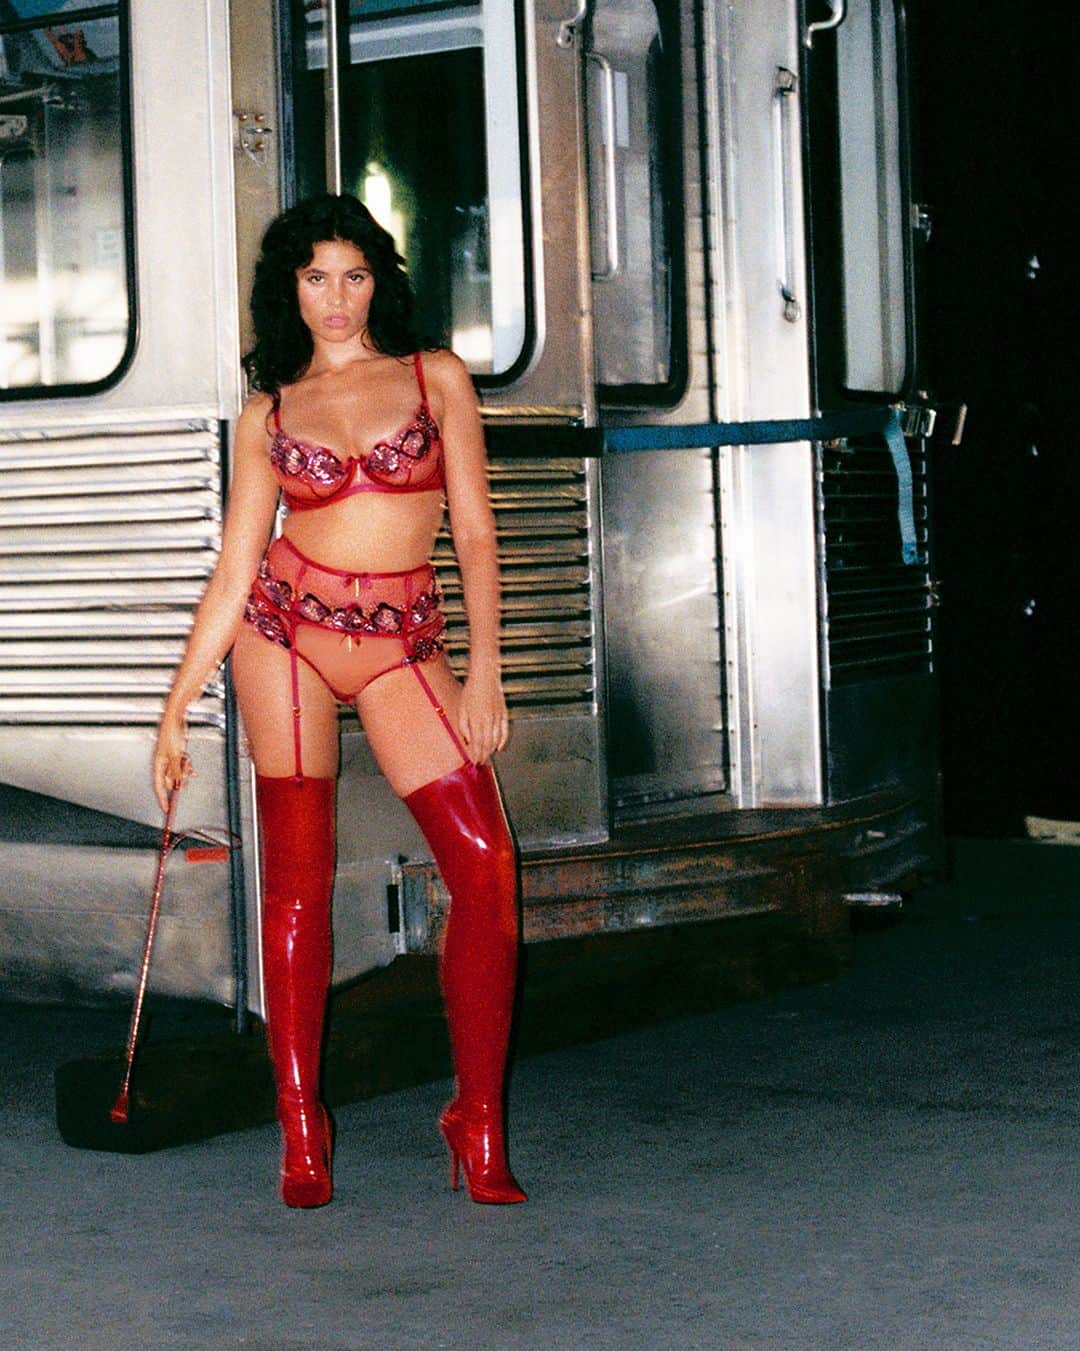 Agent Provocateurのインスタグラム：「Let's Go, Provocateur  Hearts race as #TheHotPursuit gets even hotter. The Giana set beckons you to follow and not look back. Do you dare?  Giana's intricate beadwork and sparkling sequins have always turned heads. Now returning in bold scarlet, she's ready to stop traffic...  Tap to explore Giana.  #TheHotPursuit #KnickersForever #AgentProvocateur」